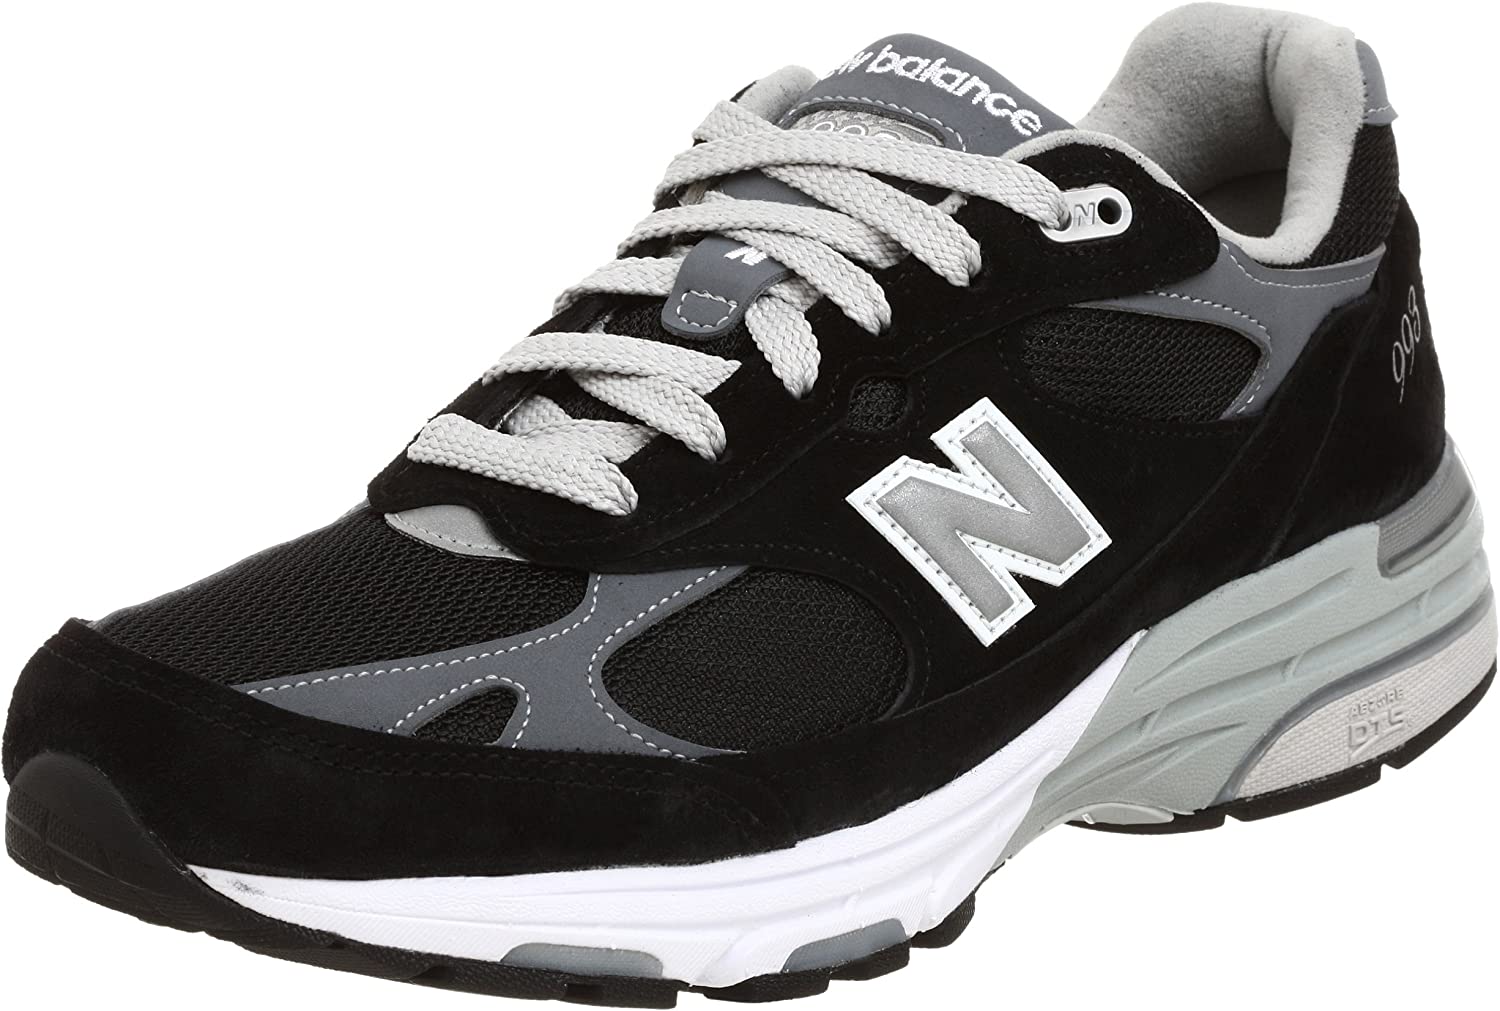 Are New Balance Shoes Good for Flat Feet?